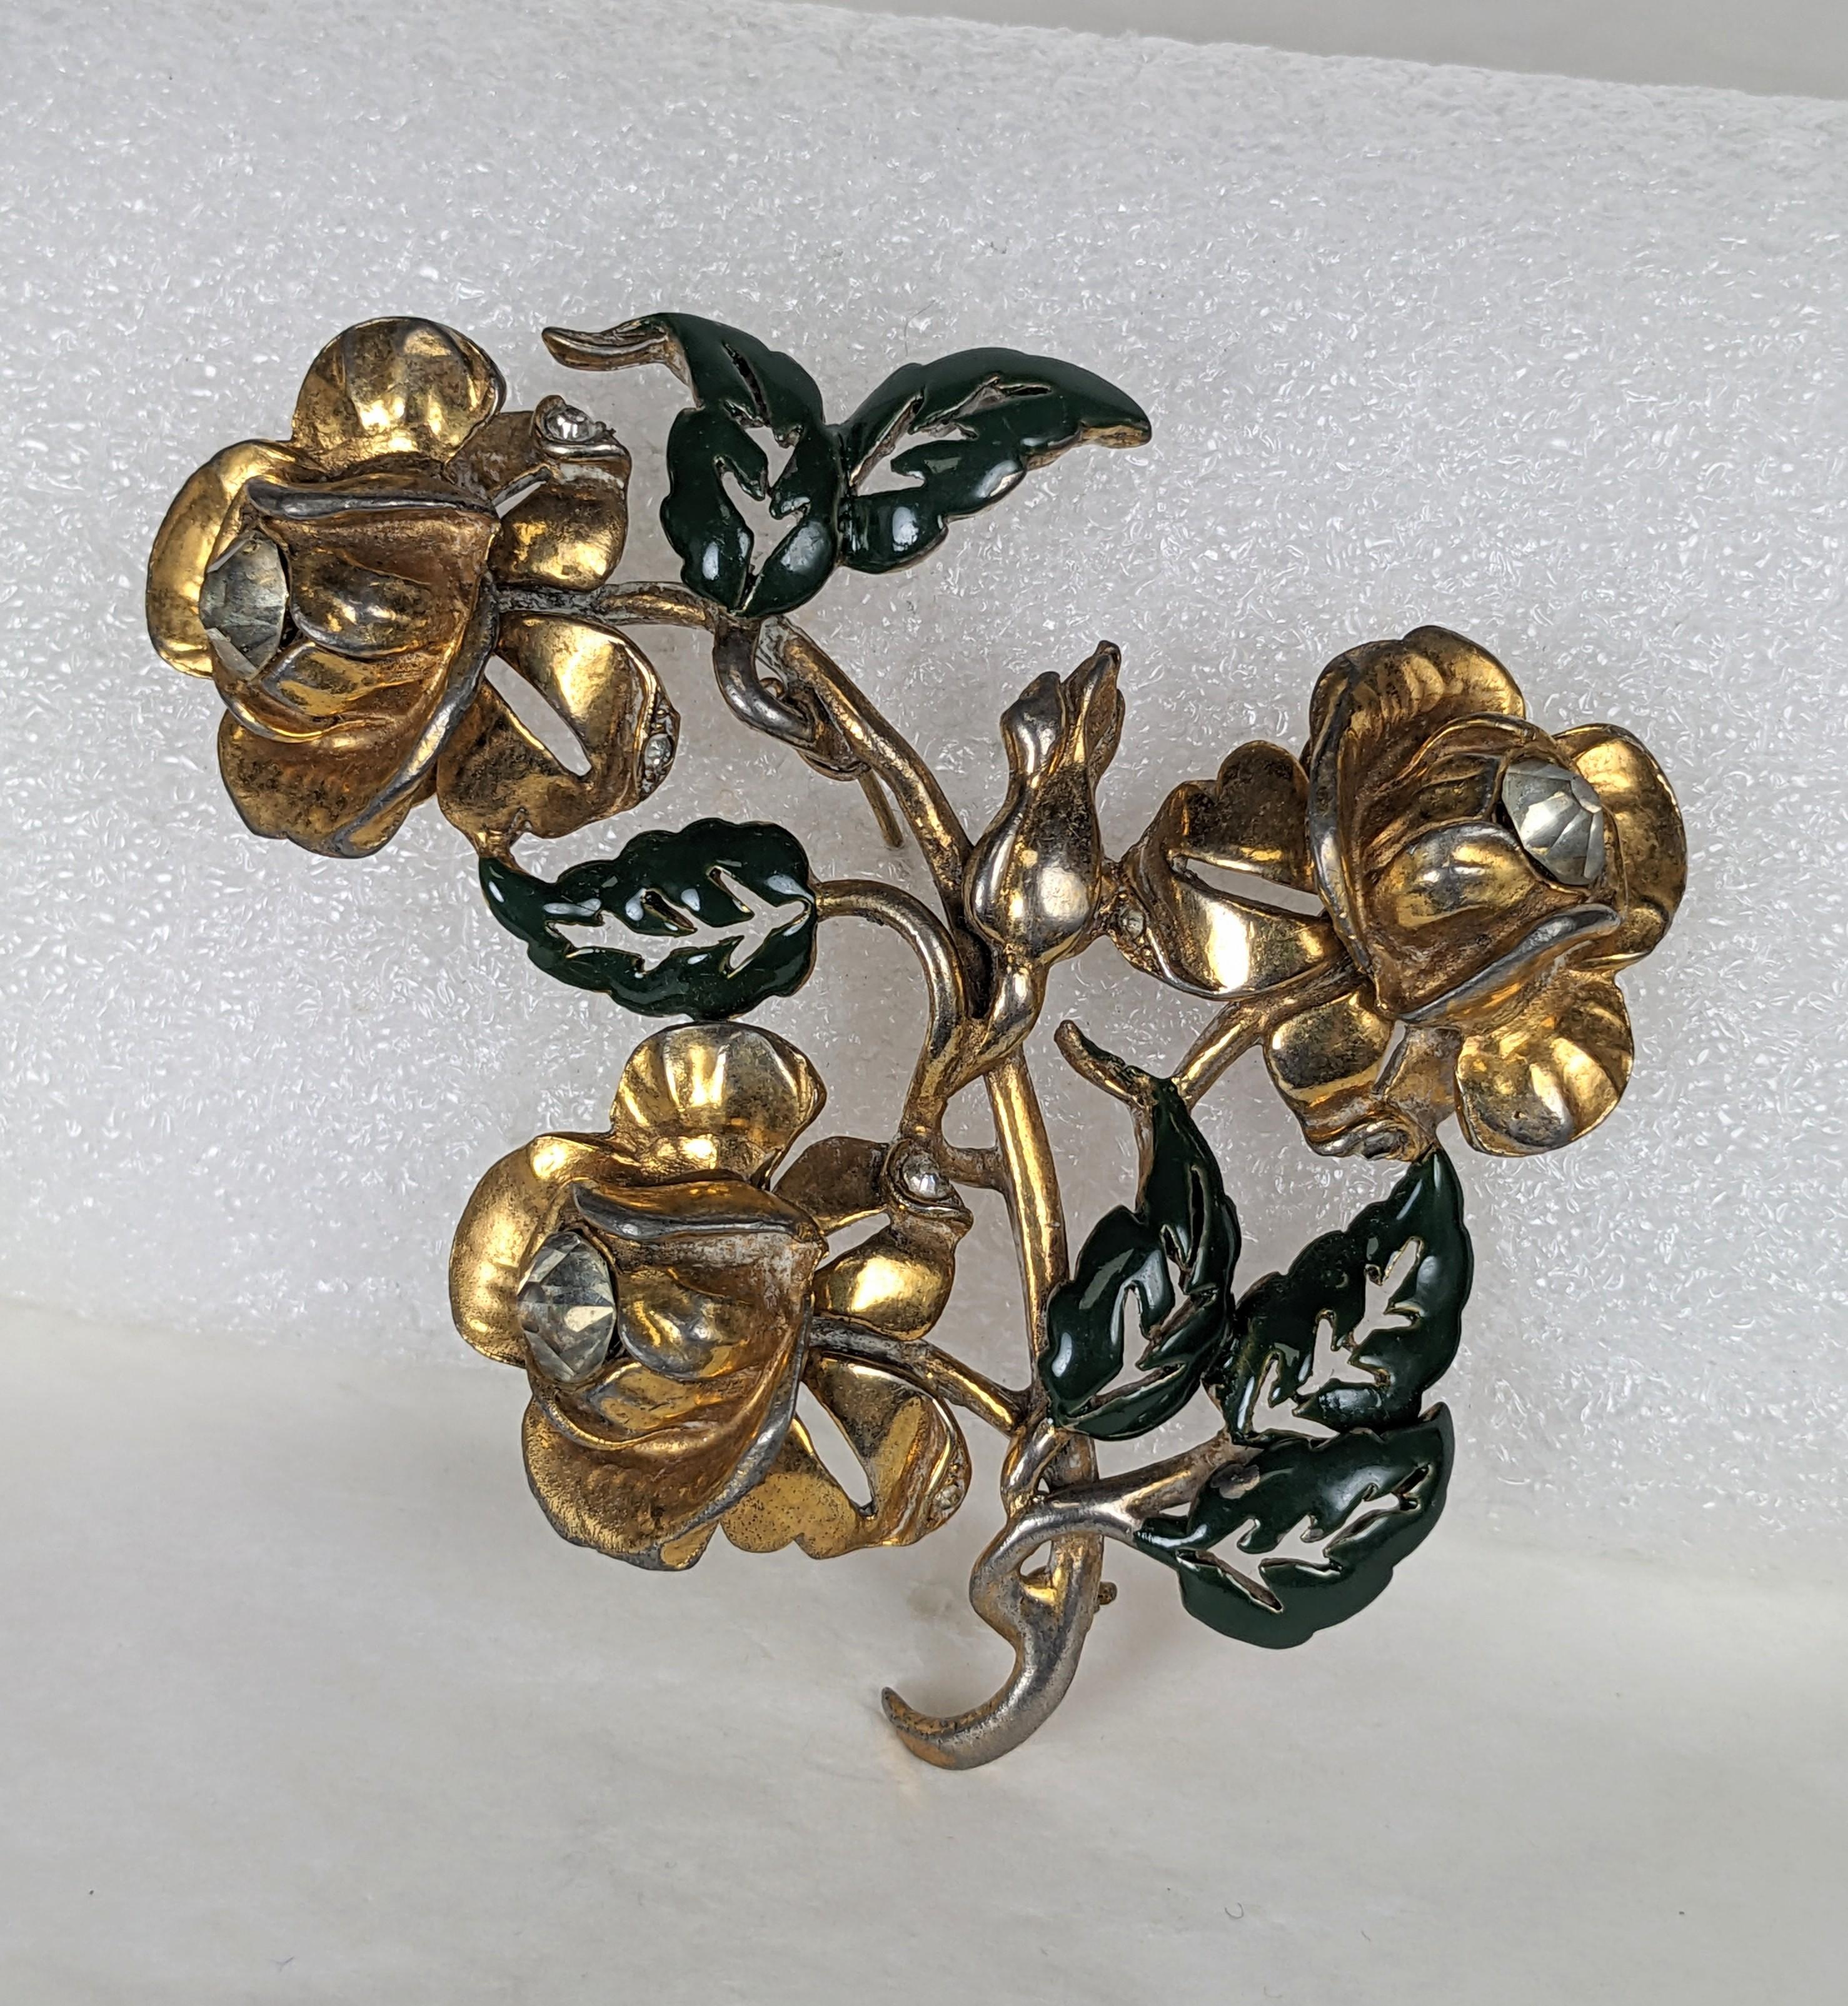 Massive Retro Flower Spray from the 1940's. Unsigned but likely made by Reja, with pierced leaves. Large gilt rose flowerheads with crystal centers are set on a large spray with enamel green leaves. 
3.5